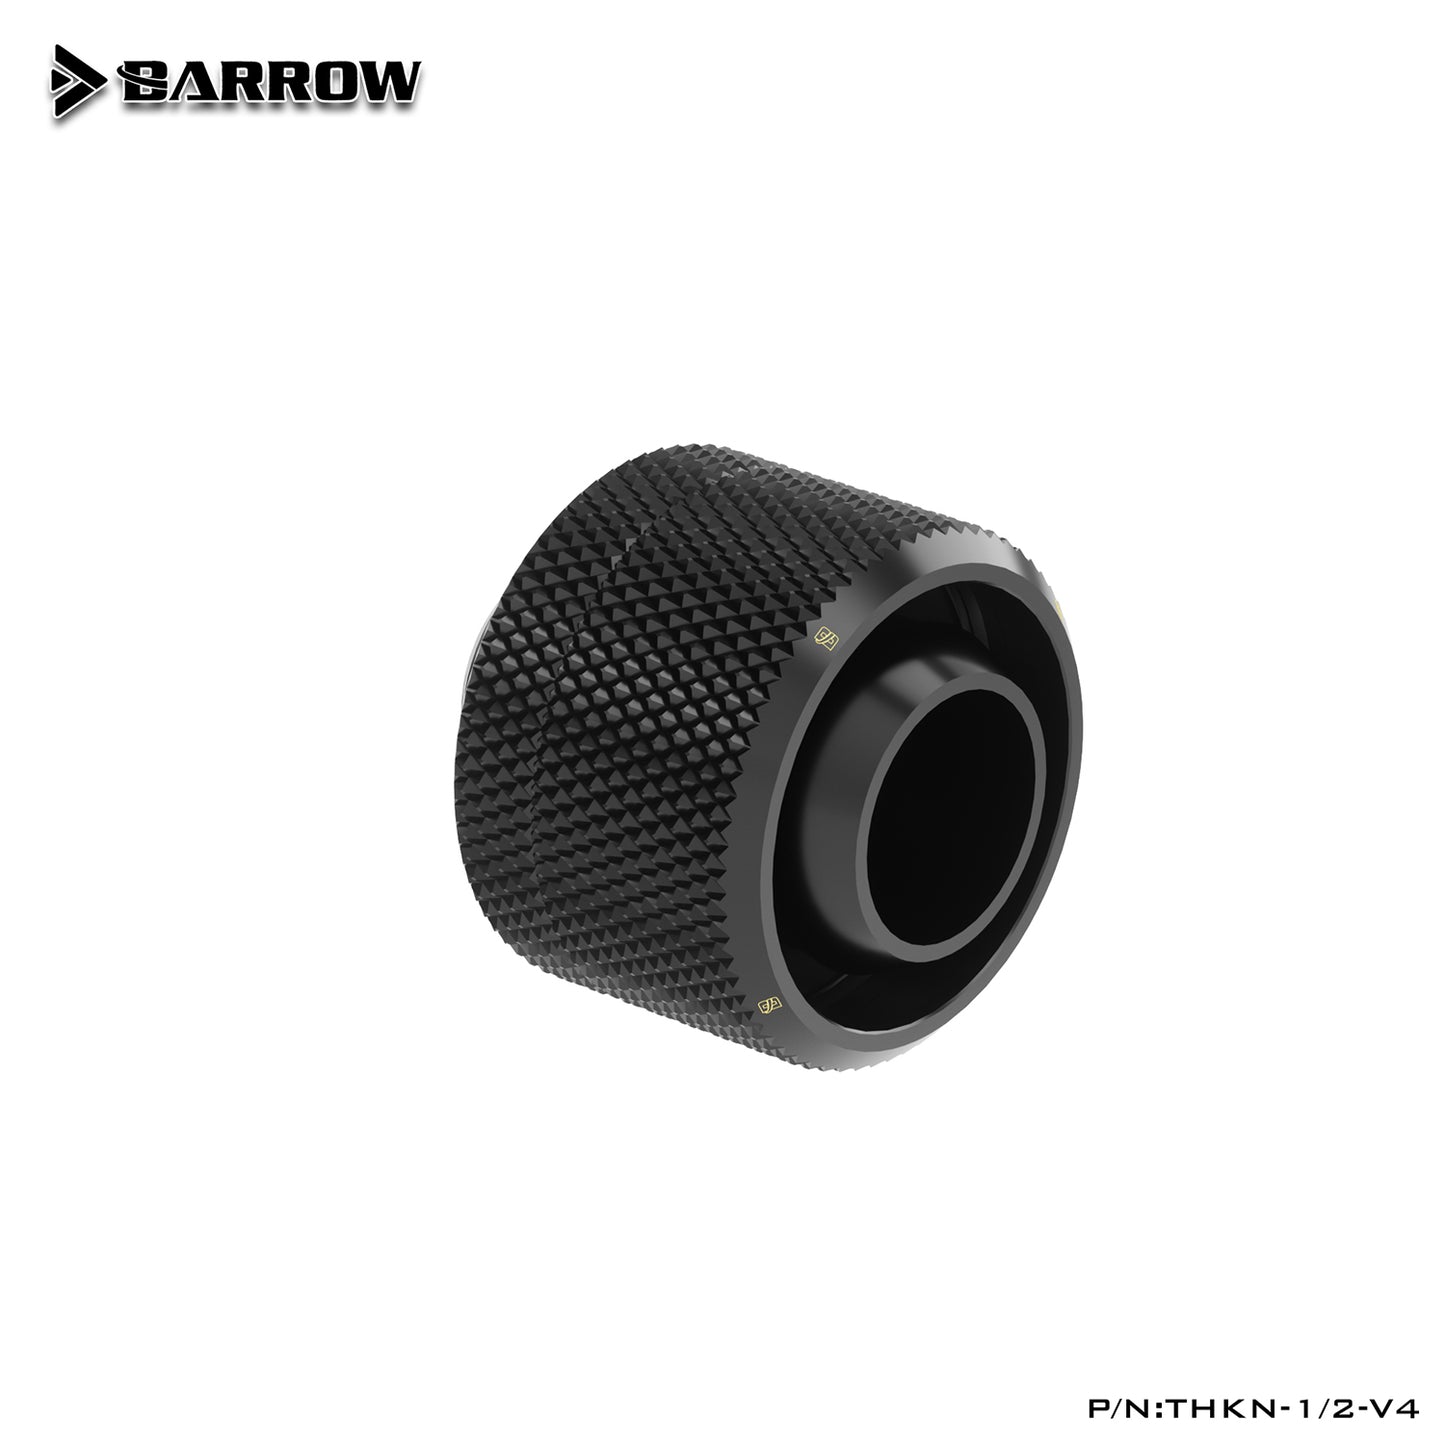 Barrow 13x19mm Soft Tube Fitting, 1/2"ID*3/4"OD G1/4" Compression Connector, Water Cooling Soft Tubing Compression Adapter, THKN-1/2-V4